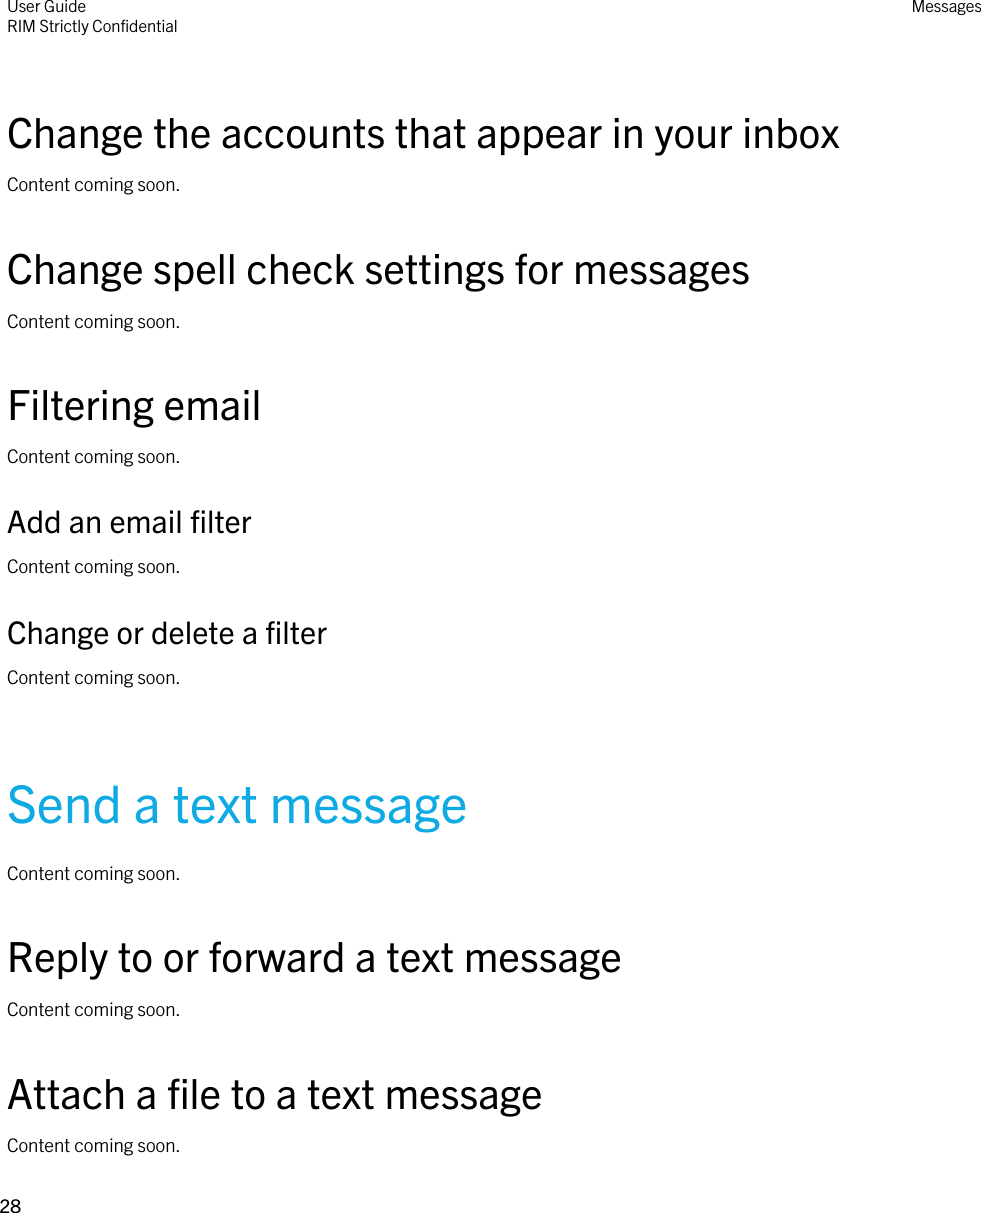 Change the accounts that appear in your inboxContent coming soon.Change spell check settings for messagesContent coming soon.Filtering emailContent coming soon.Add an email filterContent coming soon.Change or delete a filterContent coming soon.Send a text messageContent coming soon.Reply to or forward a text messageContent coming soon.Attach a file to a text messageContent coming soon.User GuideRIM Strictly ConfidentialMessages28 